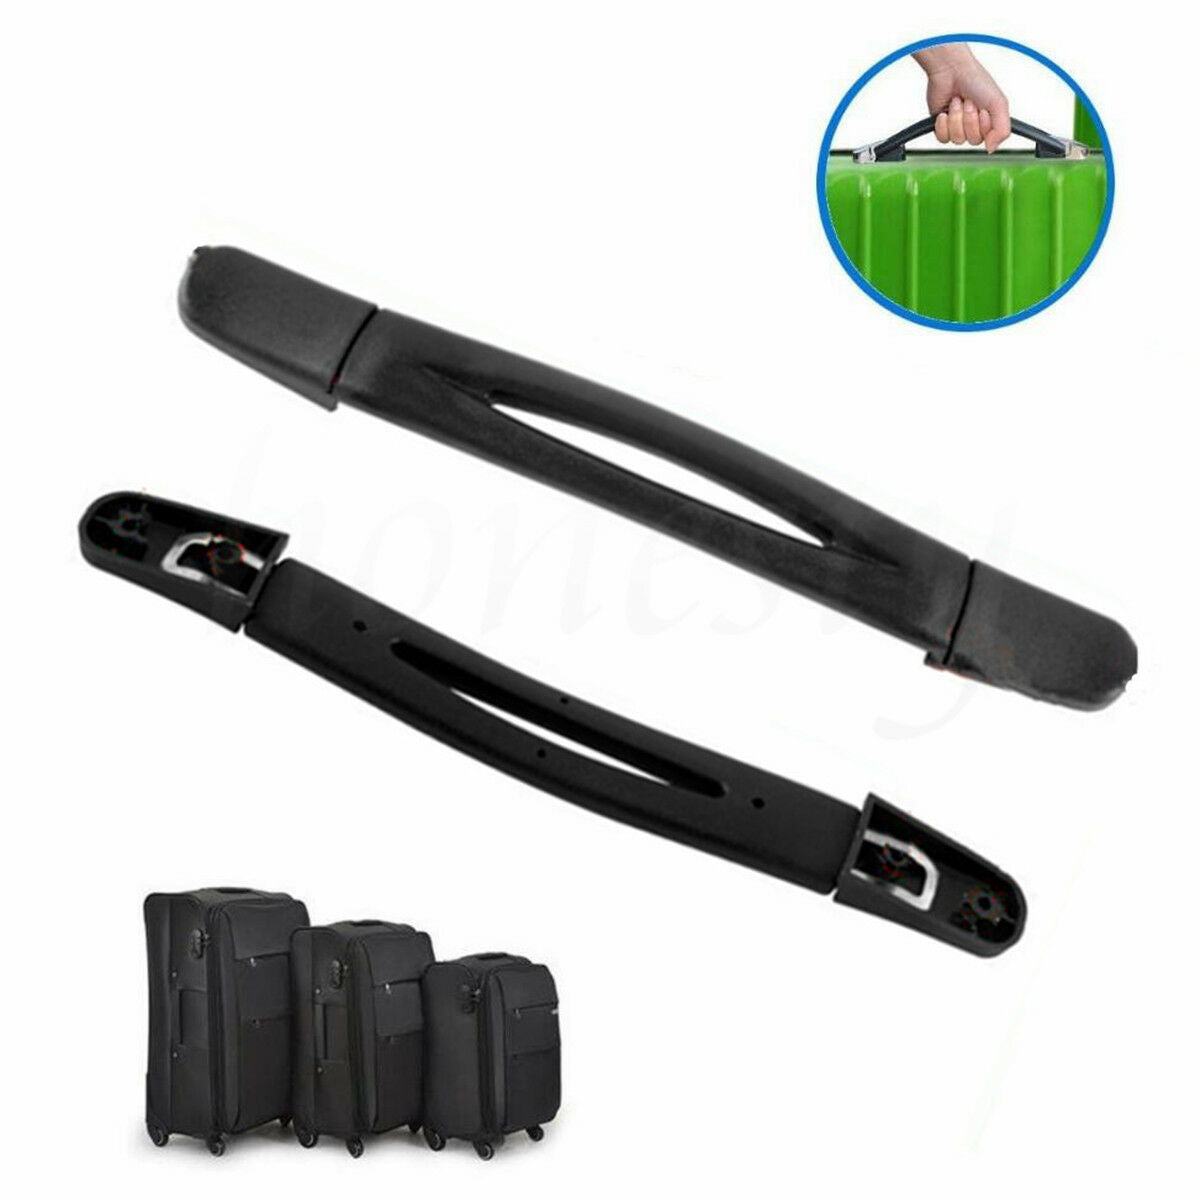 23cm Spare Strap Pull Case Handle Grip Replacement Kit For Suitcase Box Luggage